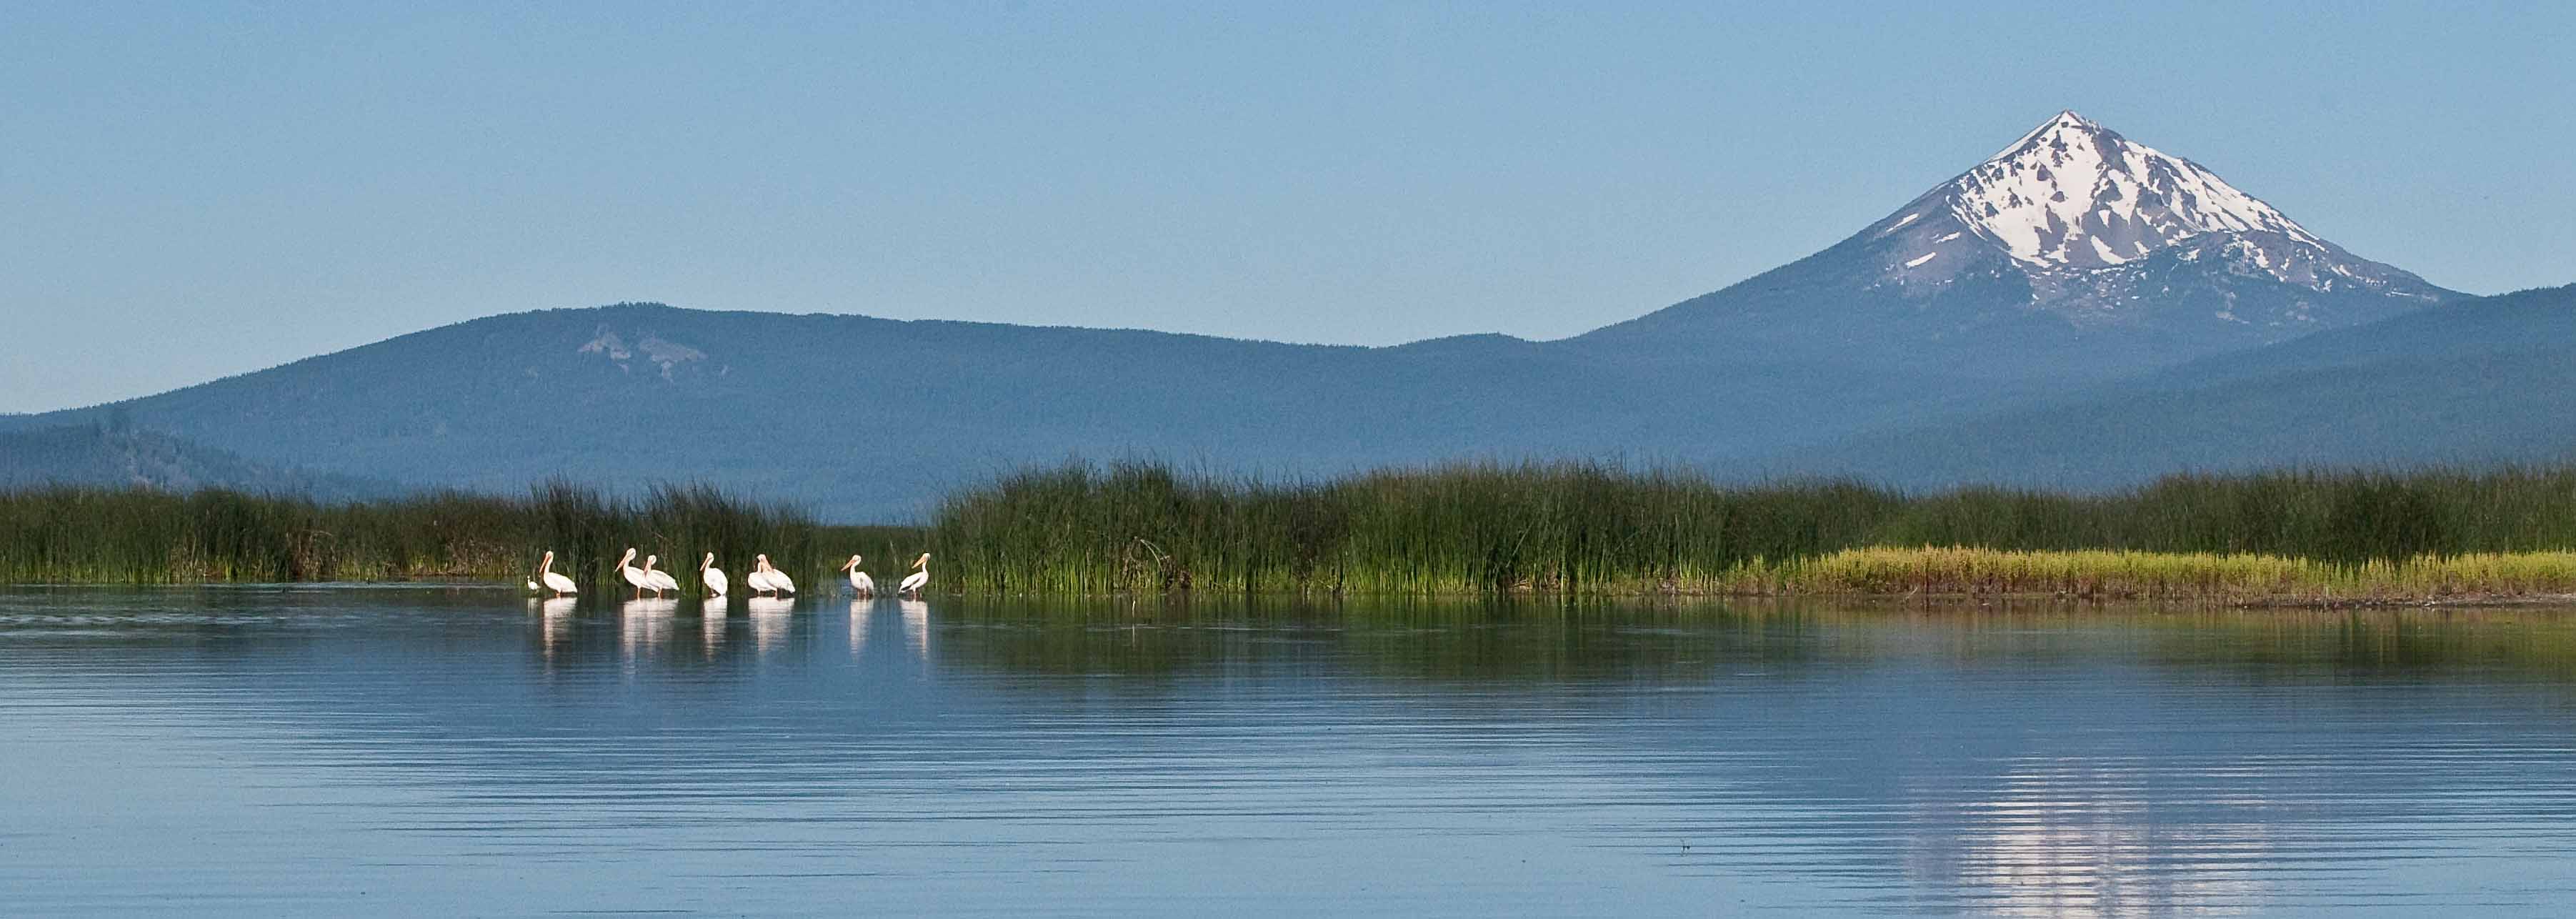 lake with birds and a mountain